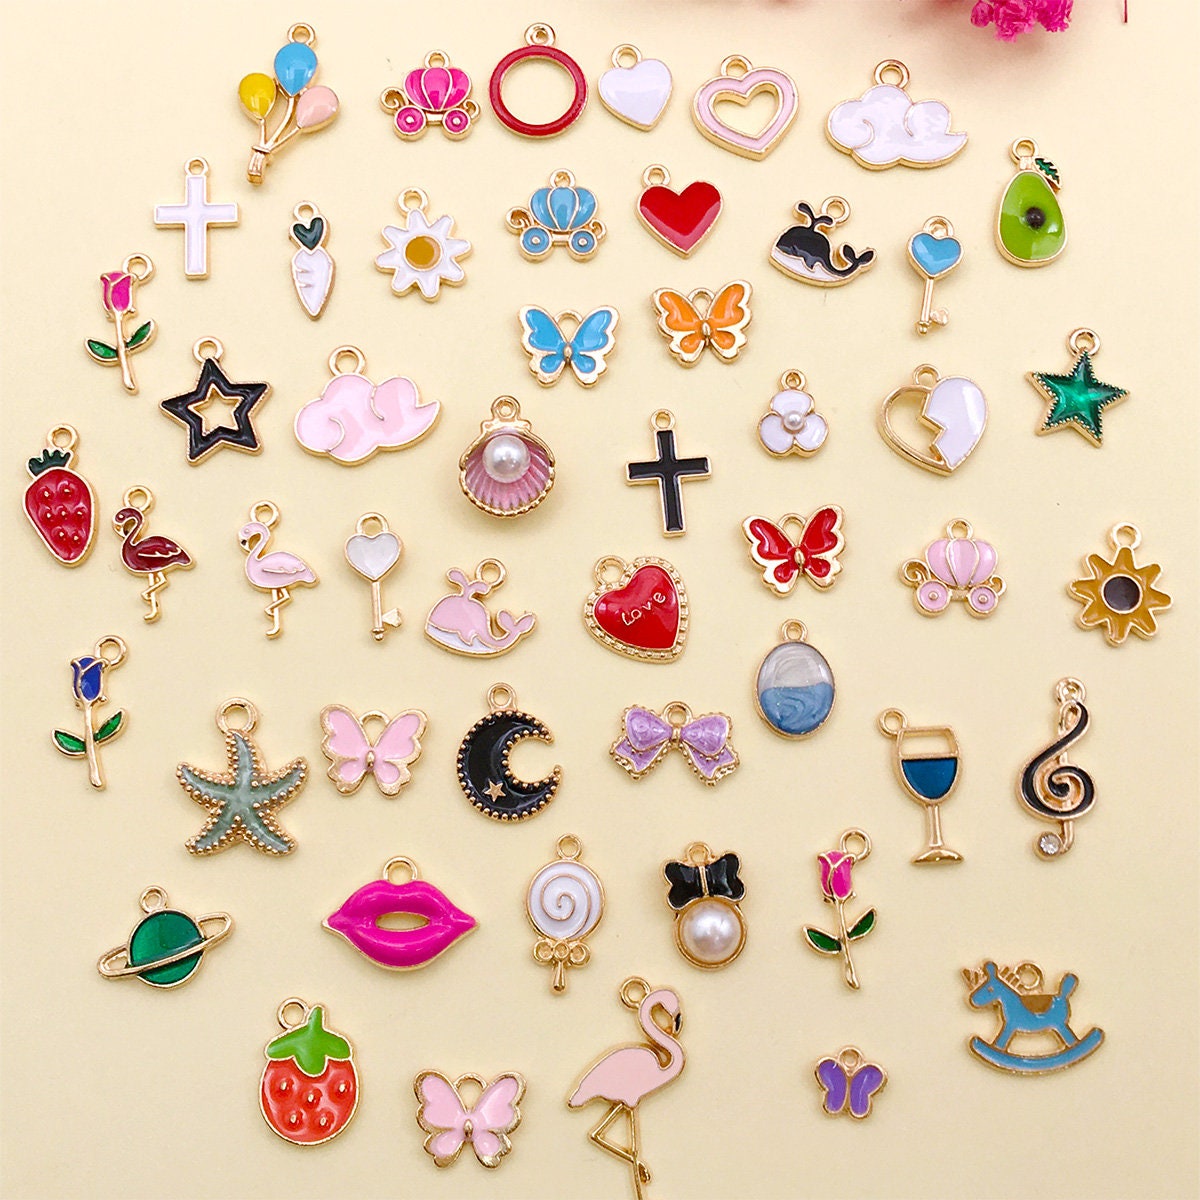 10-50pcs/Lot Random Mixed Kawaii Colorful Enamel Charms For Jewelry Making  Supplies Heart Sunflower Pendant Charms In Bulk Items